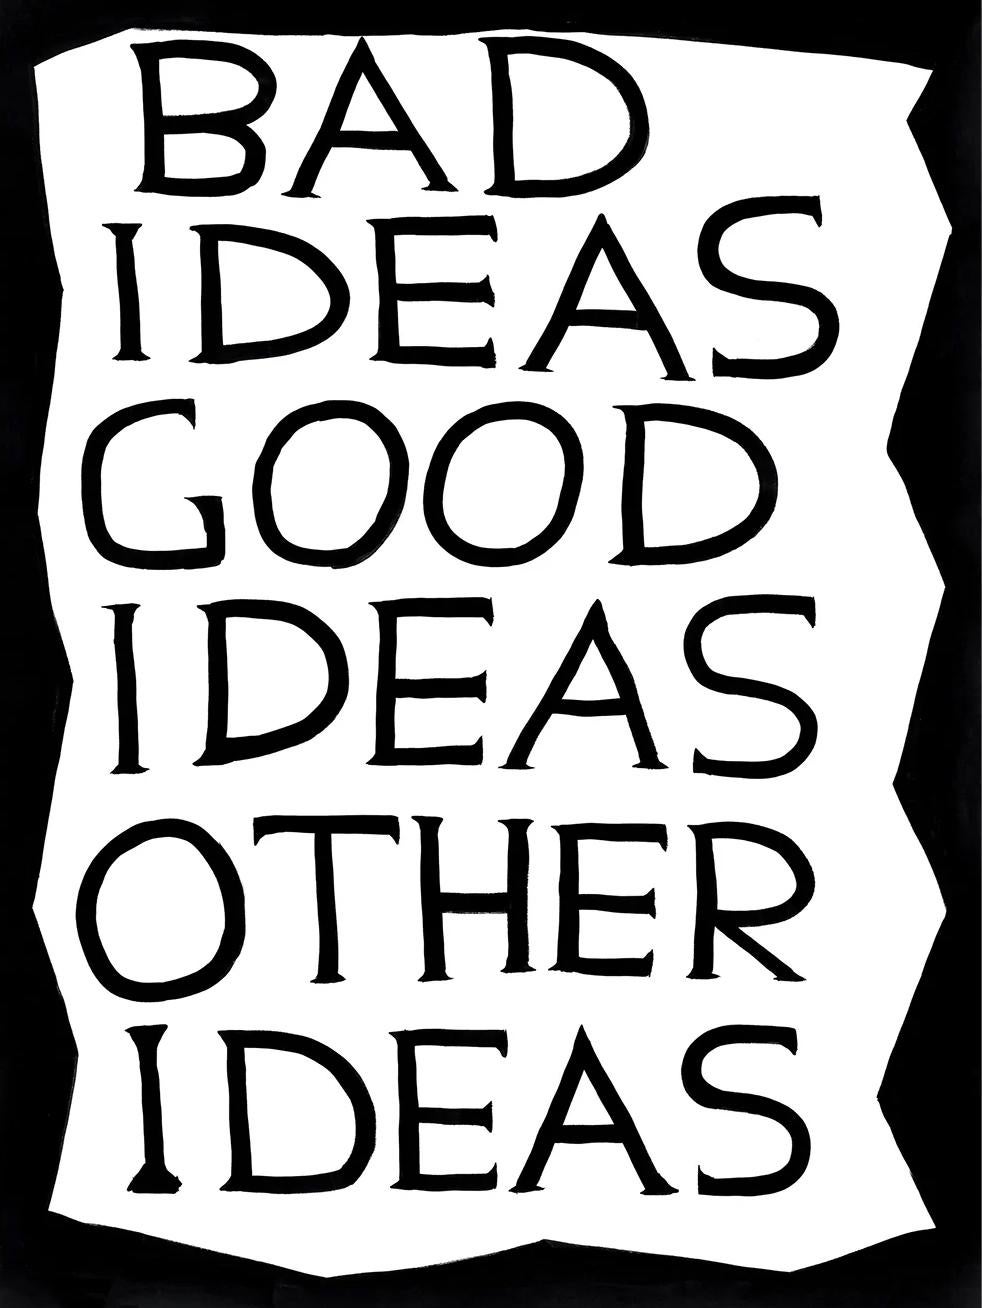 David Shrigley (English b. 1968)
Untitled (Bad Ideas Good Ideas), 2022
Off-set lithograph
Open edition, unframed
50 x 70cm (19.69 x 27.56 inches)
Printed on 200g Munken Lynx paper by Narayana Press in Denmark

This print is based on the original